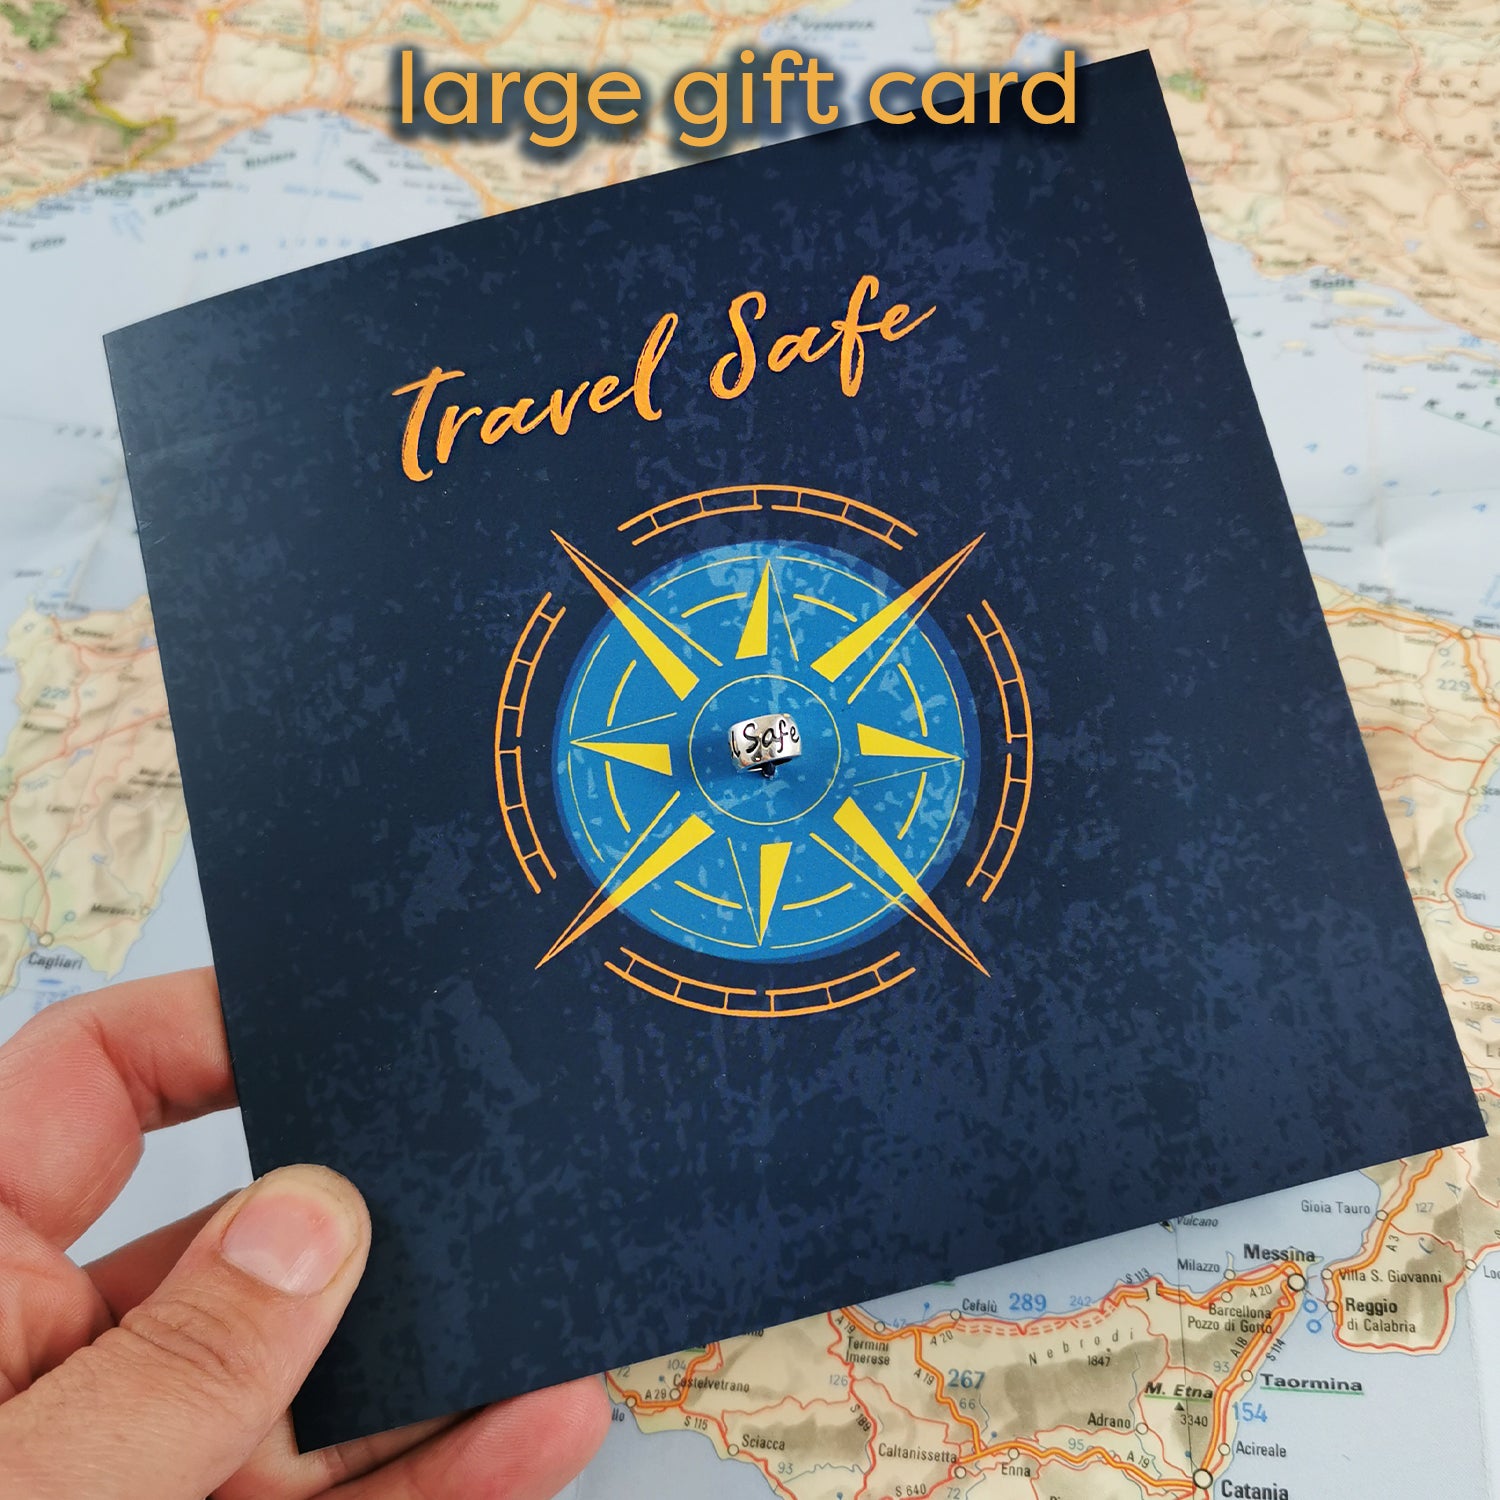 Travel safe gift card for someone going travelling with silver charm that fits Pandora bracelets